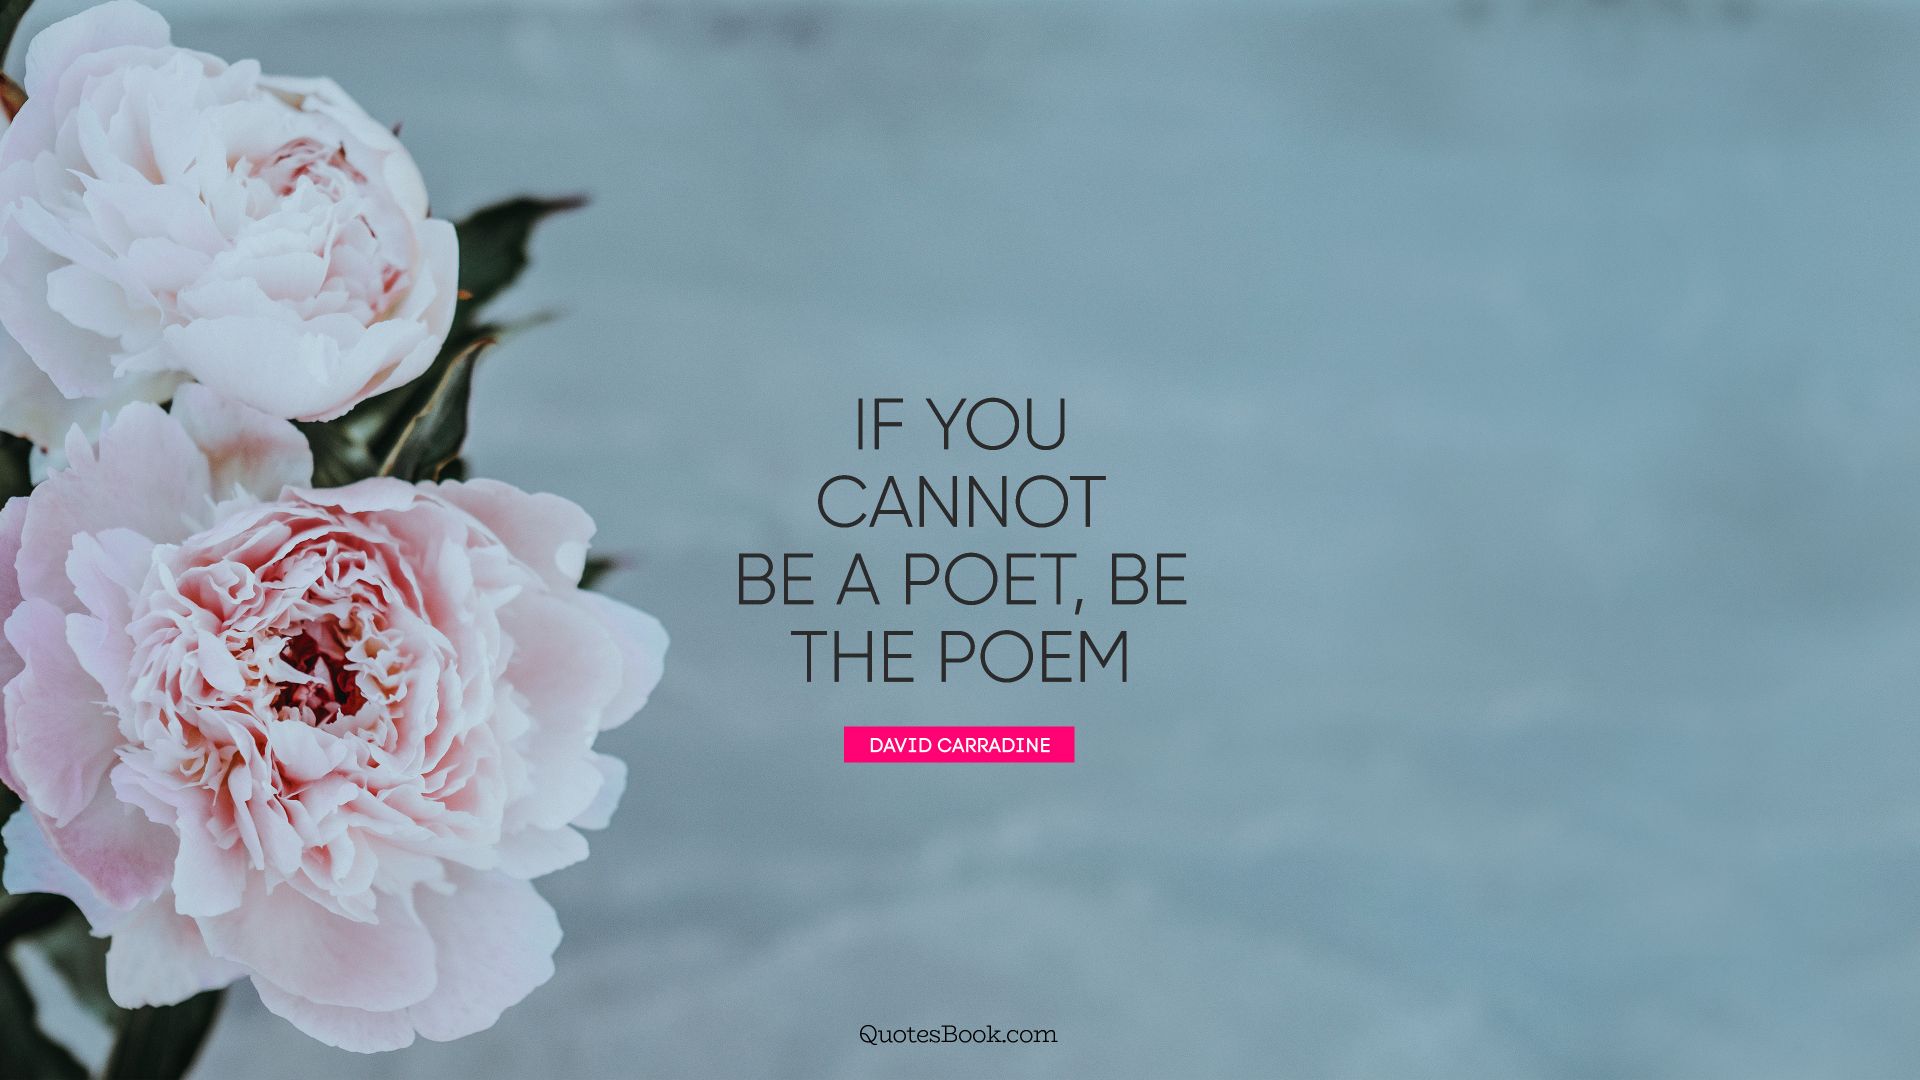 If you cannot be a poet, be the poem. - Quote by David Carradine